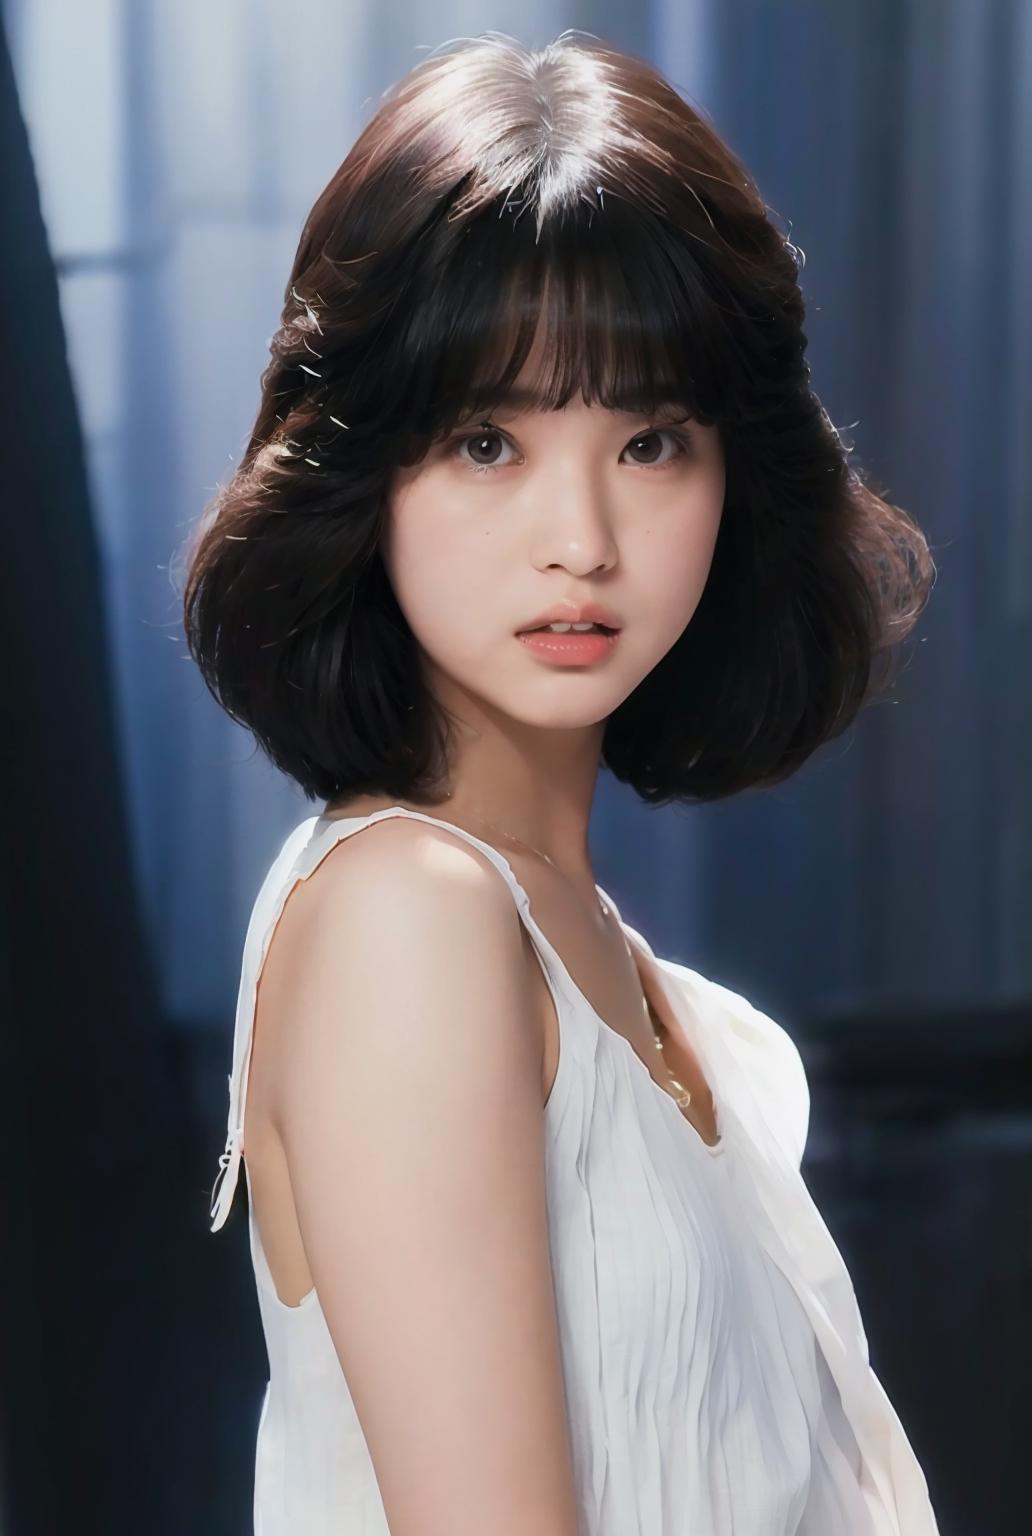 A young Asian woman with short black hair, wearing a white top, posing for a portrait.